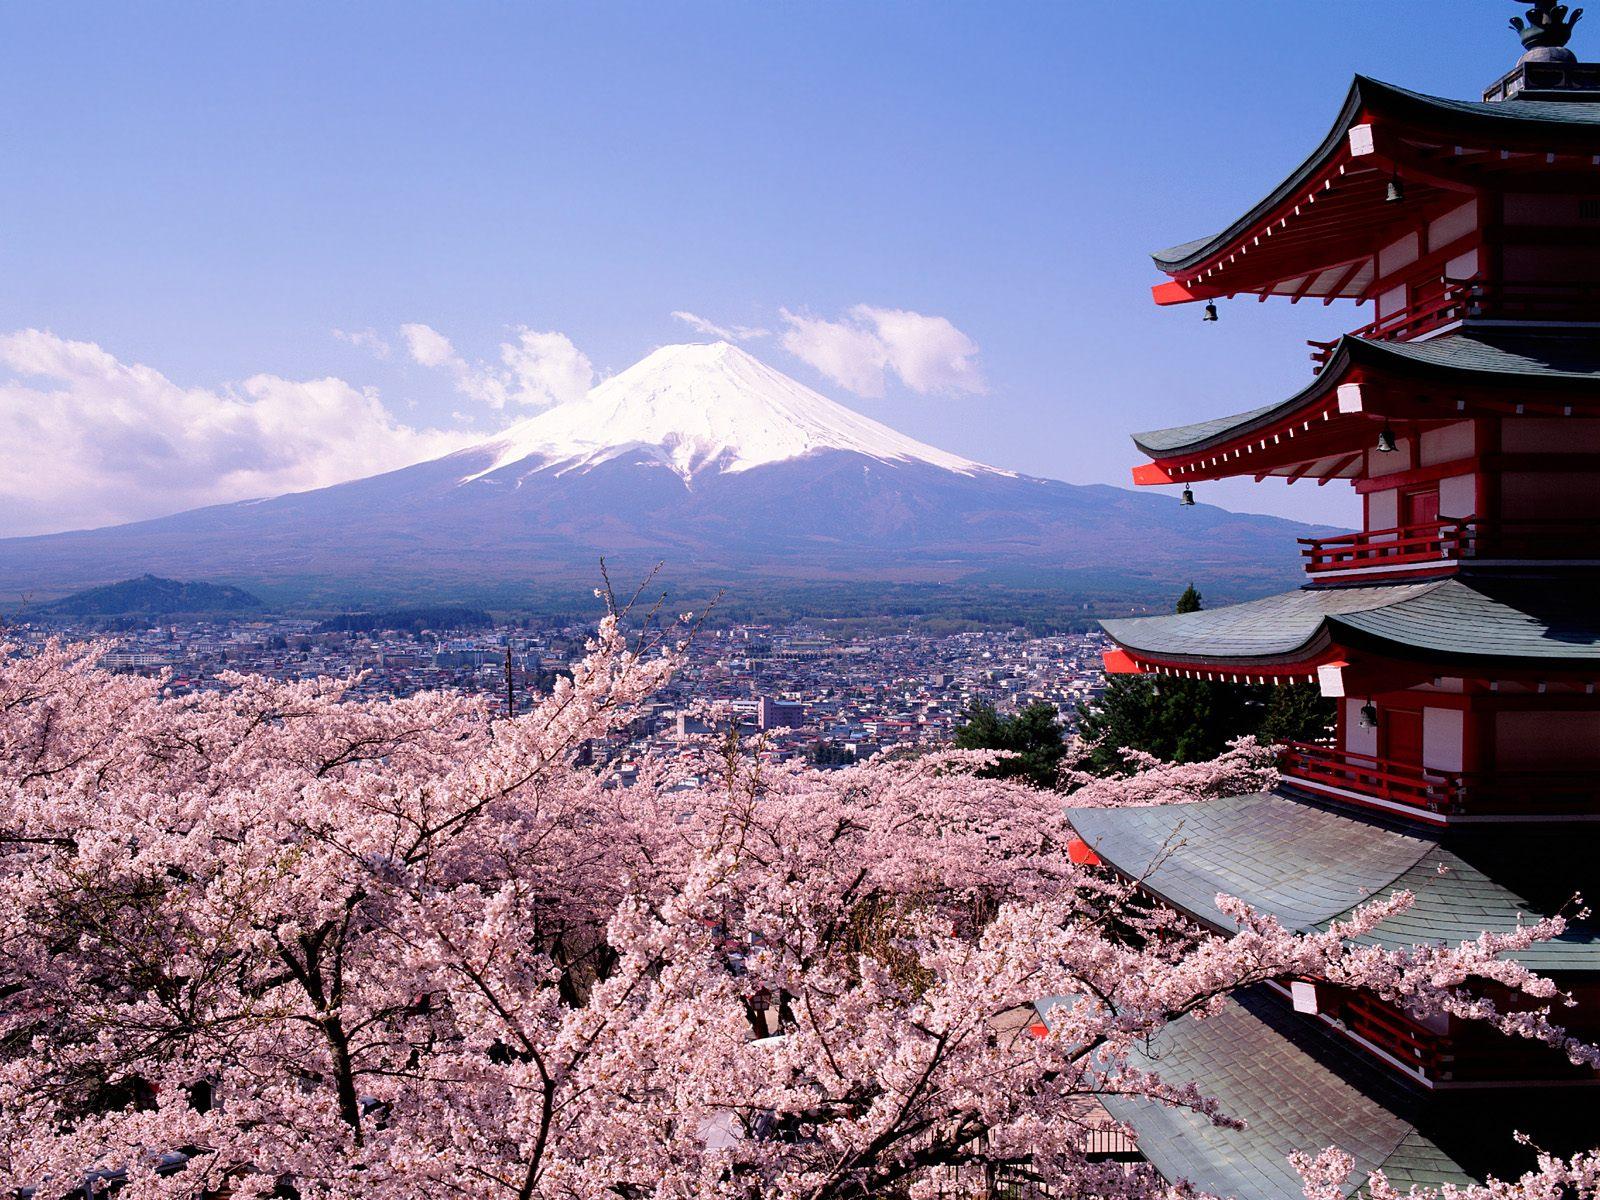 Japanese cherry blossoms in full bloom against a scenic backdrop.